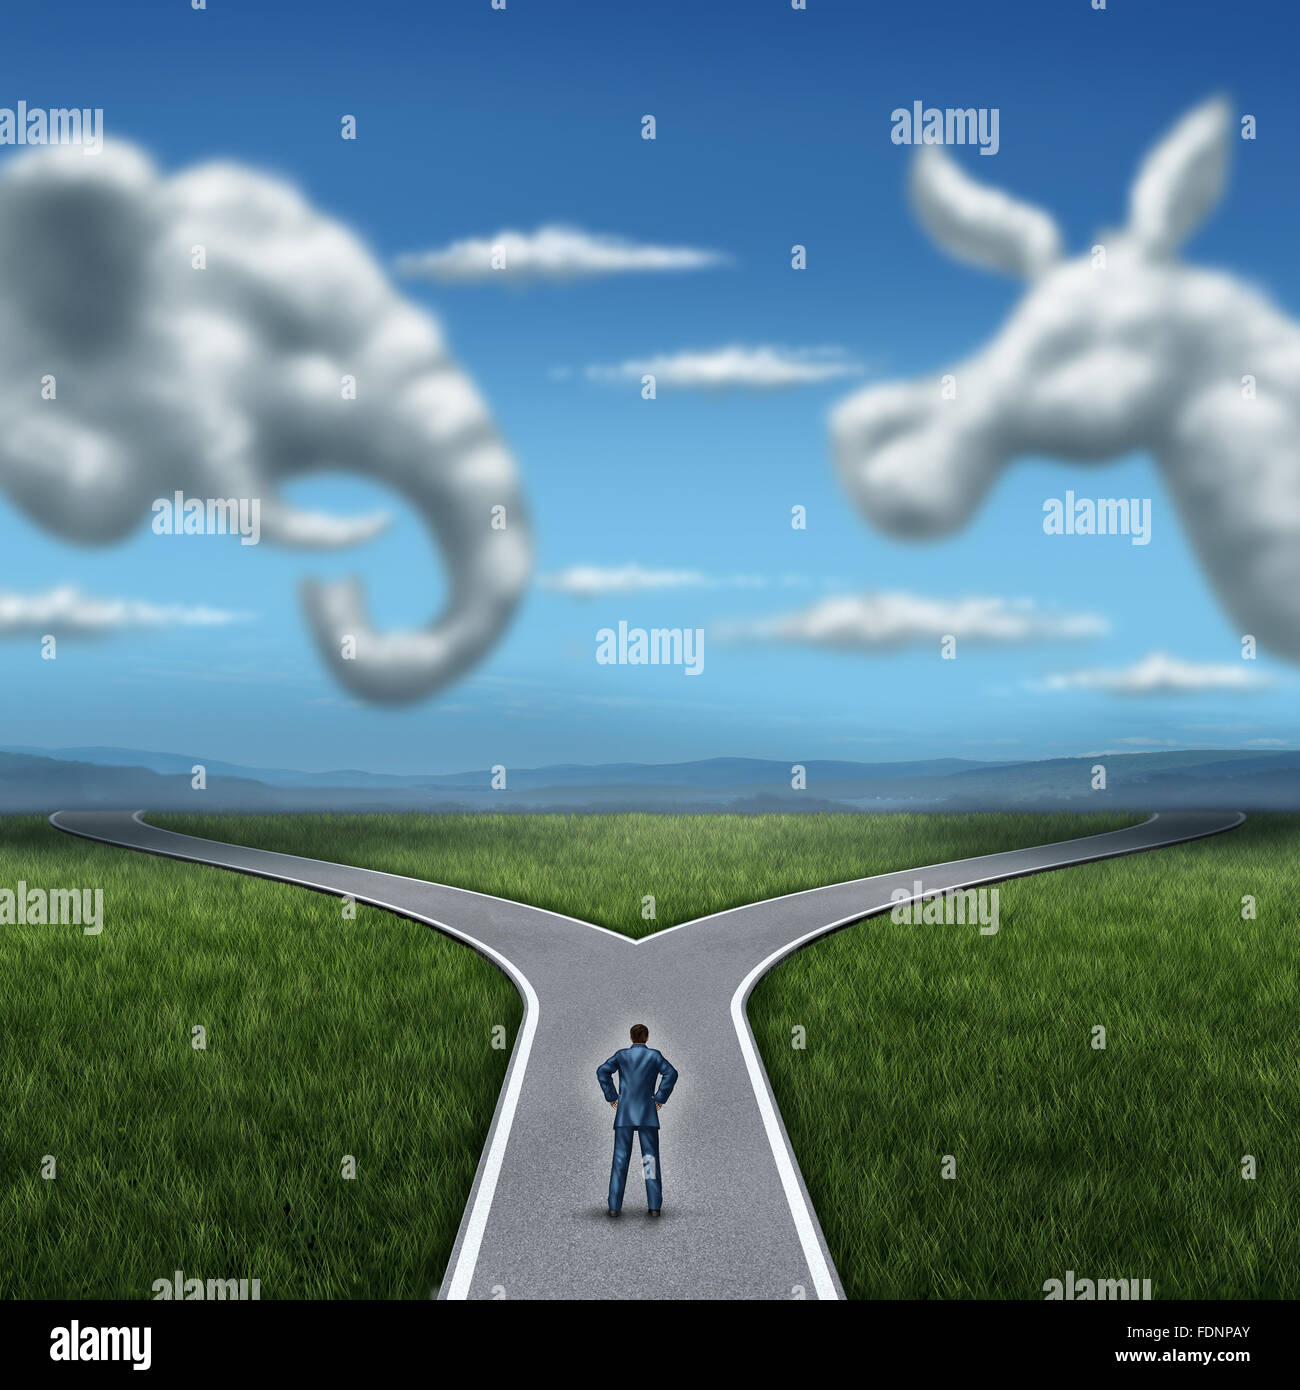 Republican versus democrat concept American election campaign fight as two clouds shaped as an elephant and donkey symbol with a voter on a cross road dilemma for the vote of the United states for an election win. Stock Photo